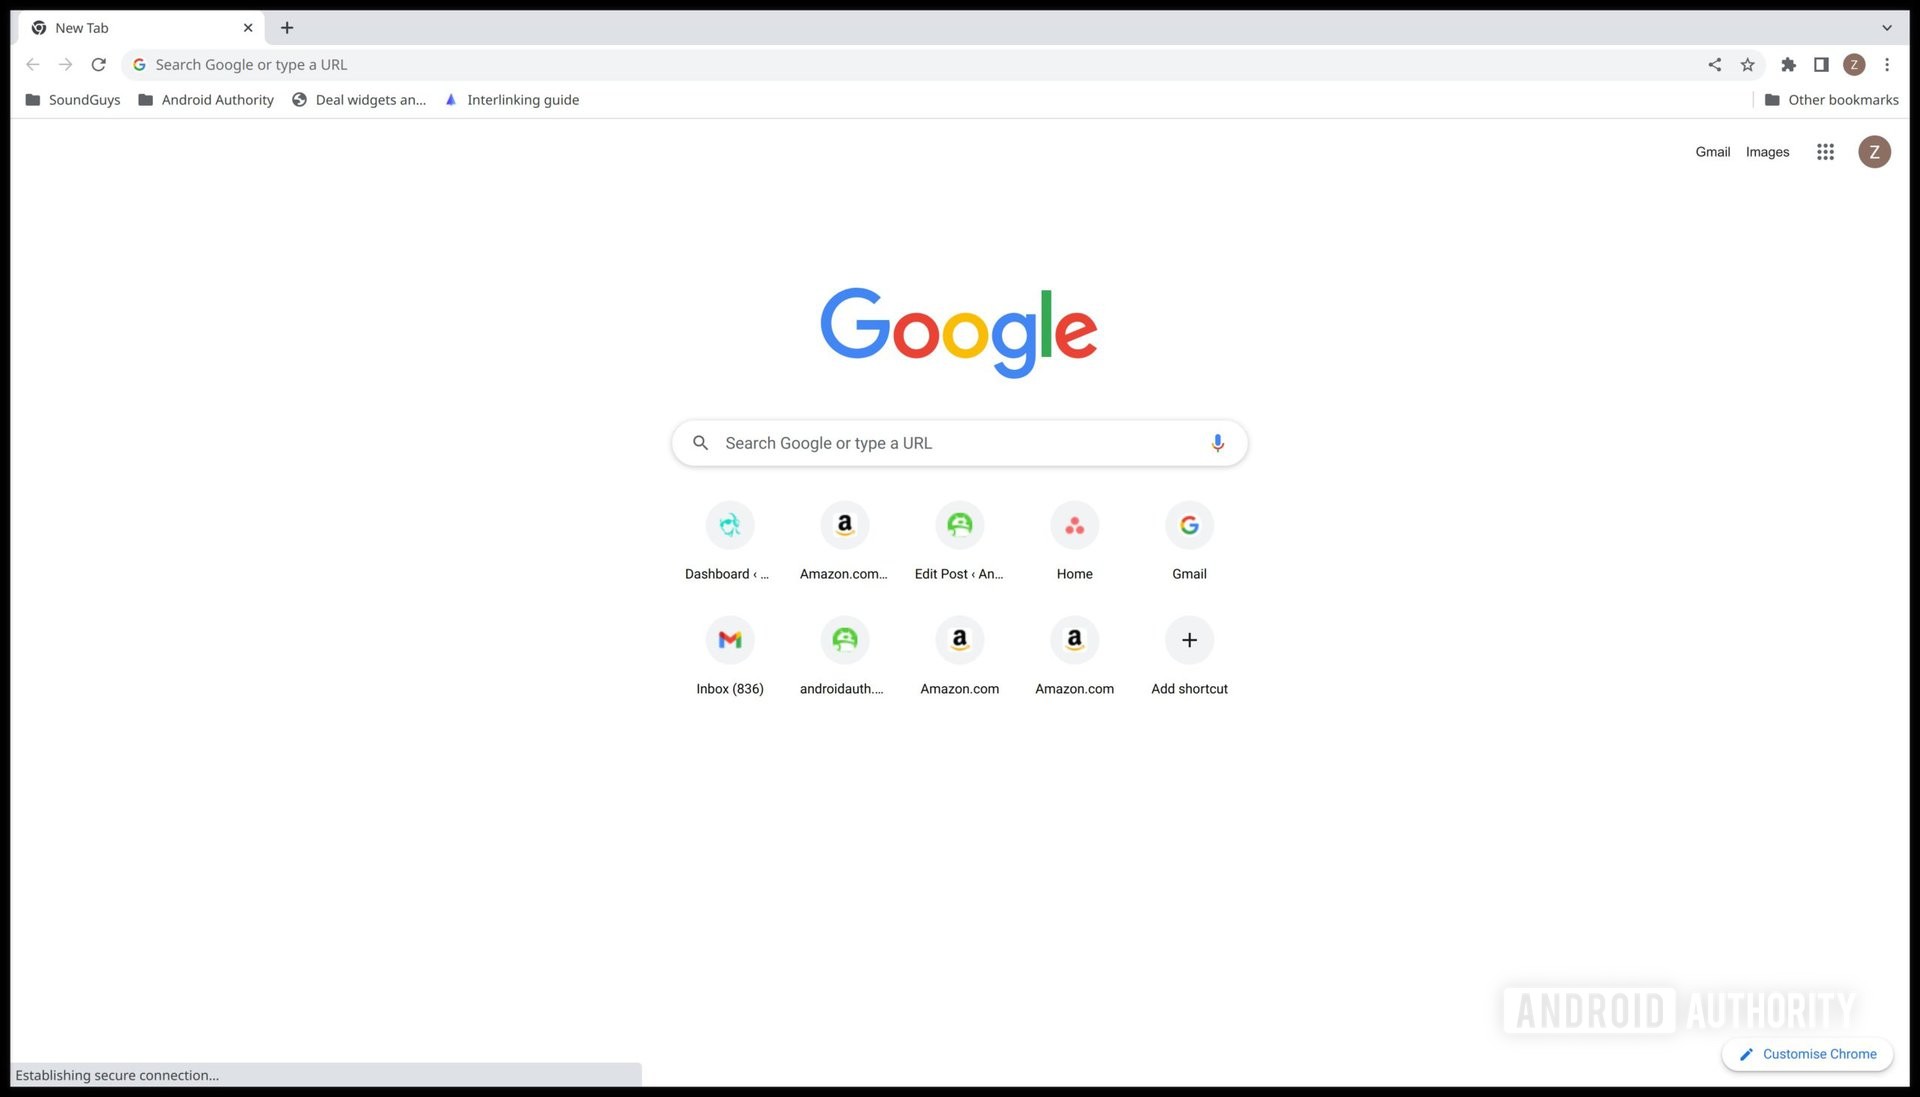 A screenshot of the Google Chrome new tab page showing the Google search engine and the "Customize Chrome" button in the bottom right-hand corner.